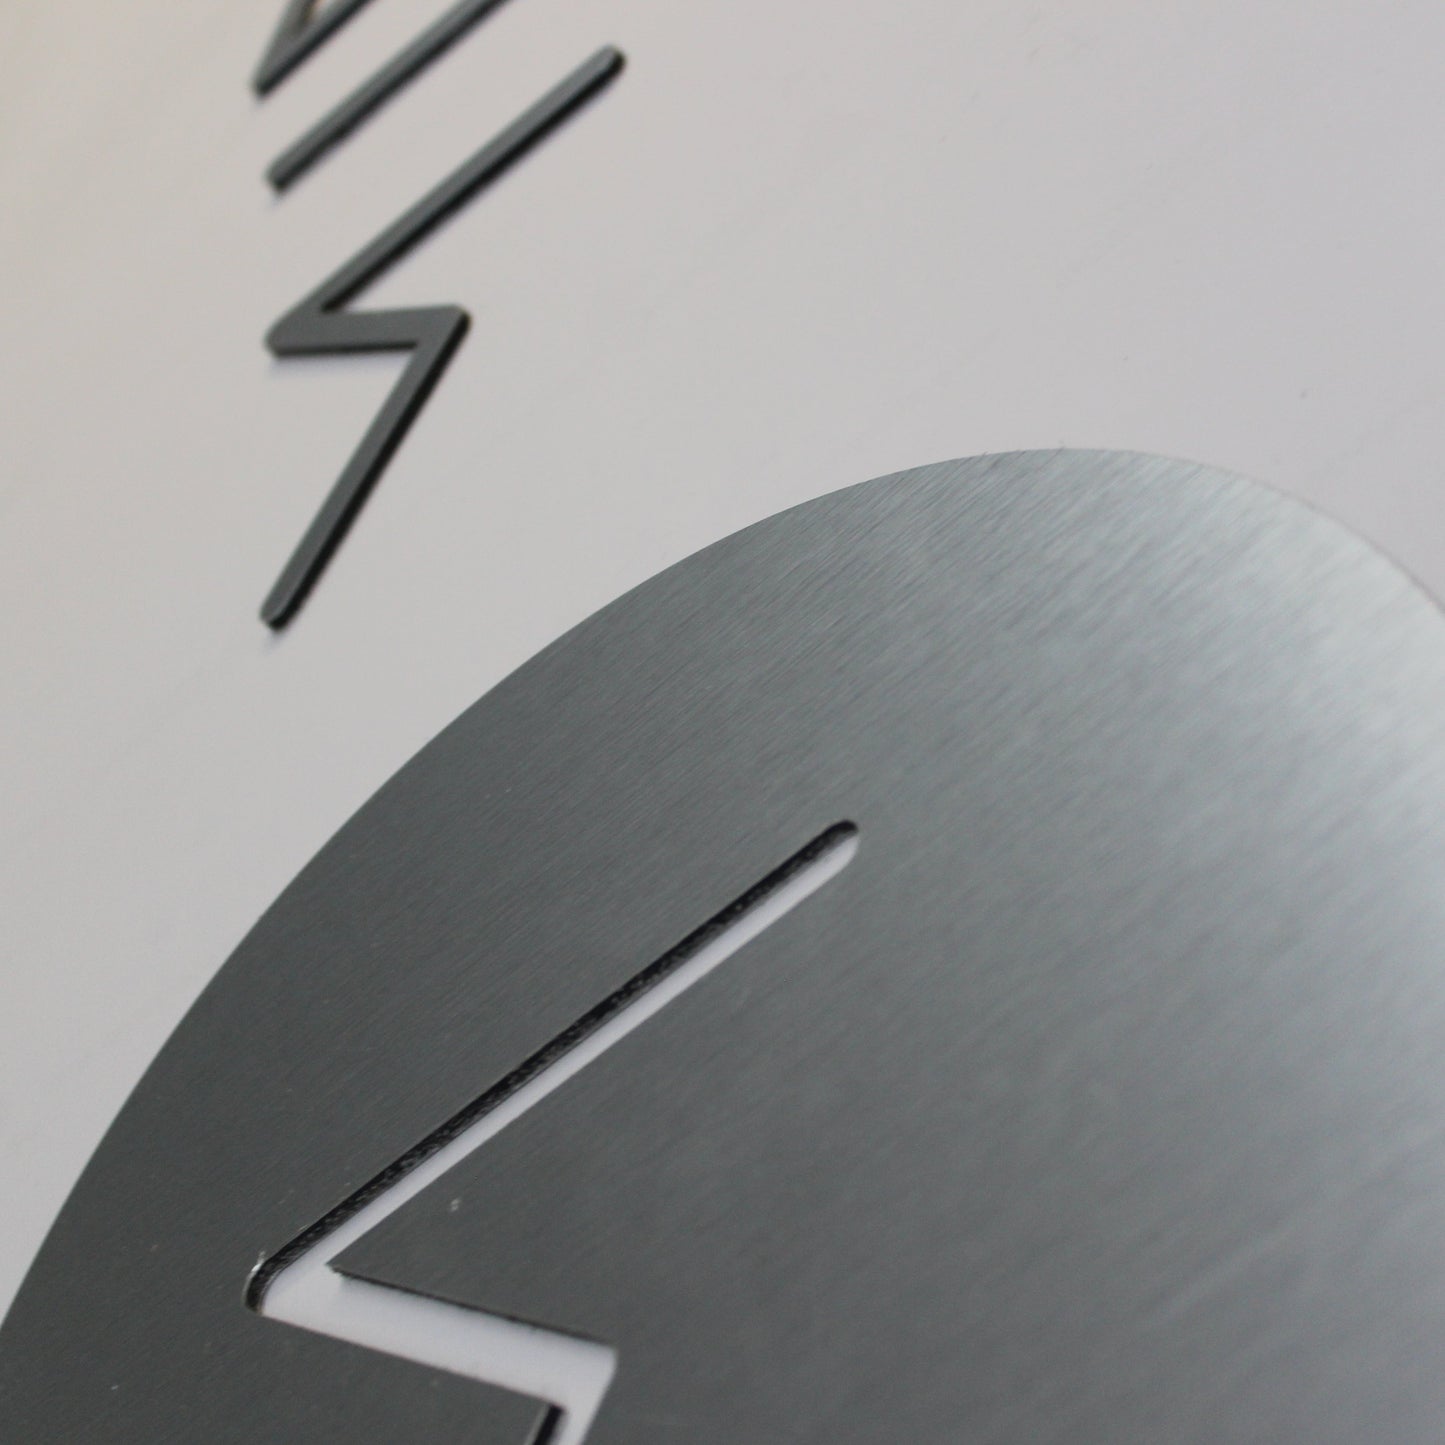 minimal contemporry logo close up with cut away logo elements